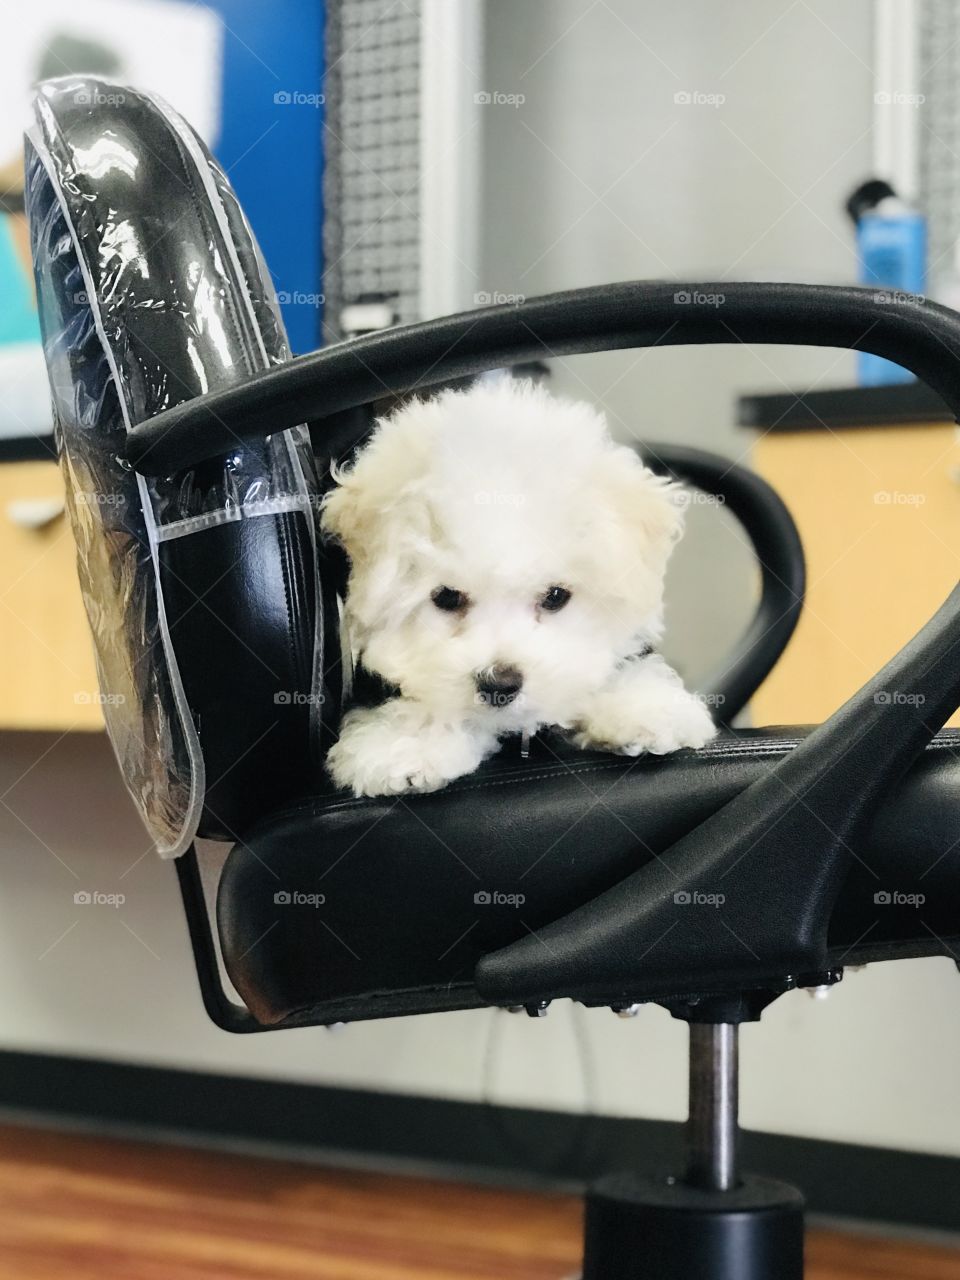 Beauty parlor. I am fluffy puppy who is invited almost everywhere. Today I am visiting the salon. Baby Bichon in stylist chair.